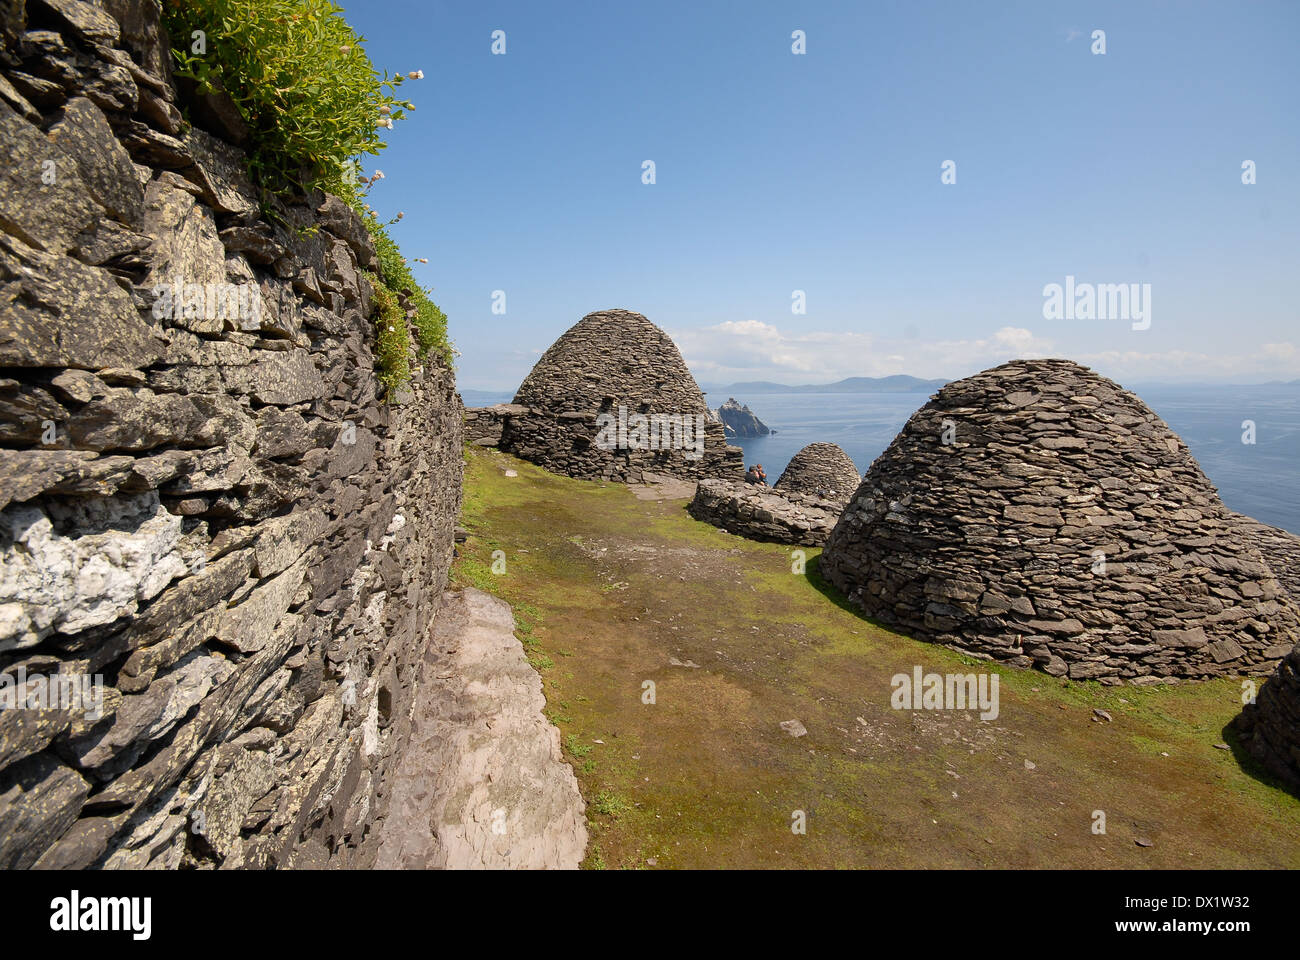 beehives at historic monastery at Skellig Michael island in Ireland Stock Photo